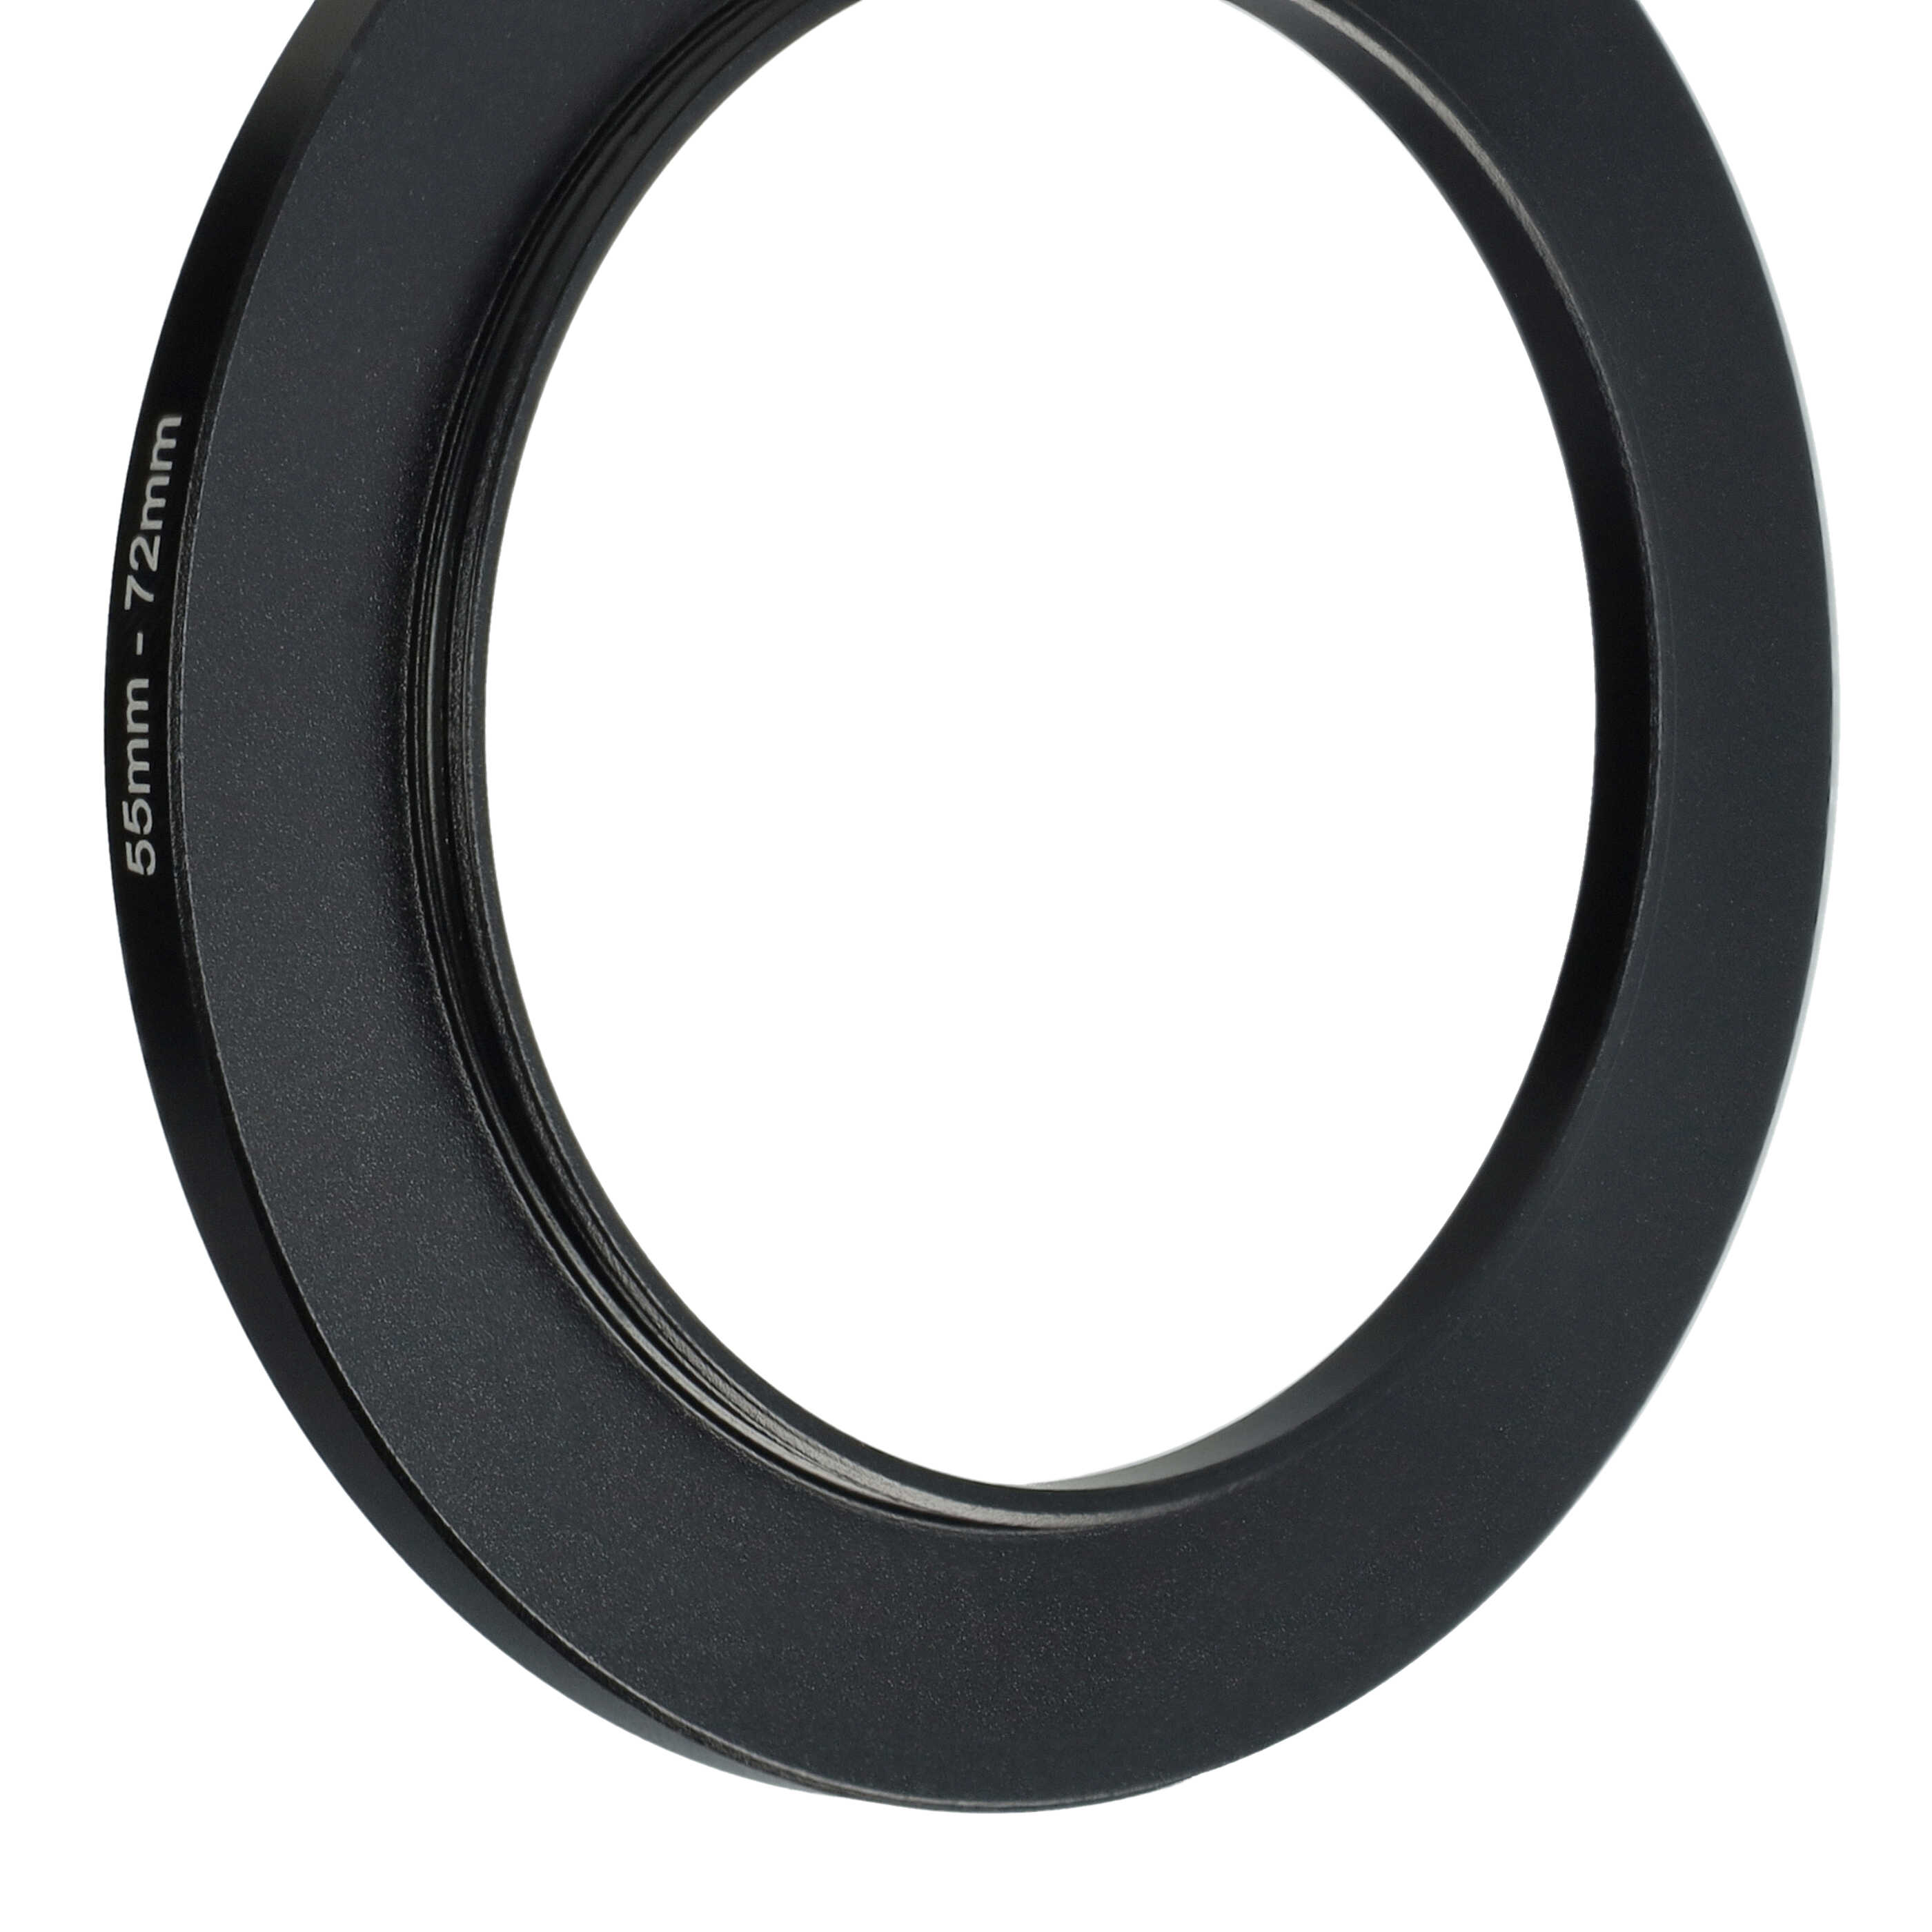 Step-Up Ring Adapter of 55 mm to 72 mmfor various Camera Lens - Filter Adapter